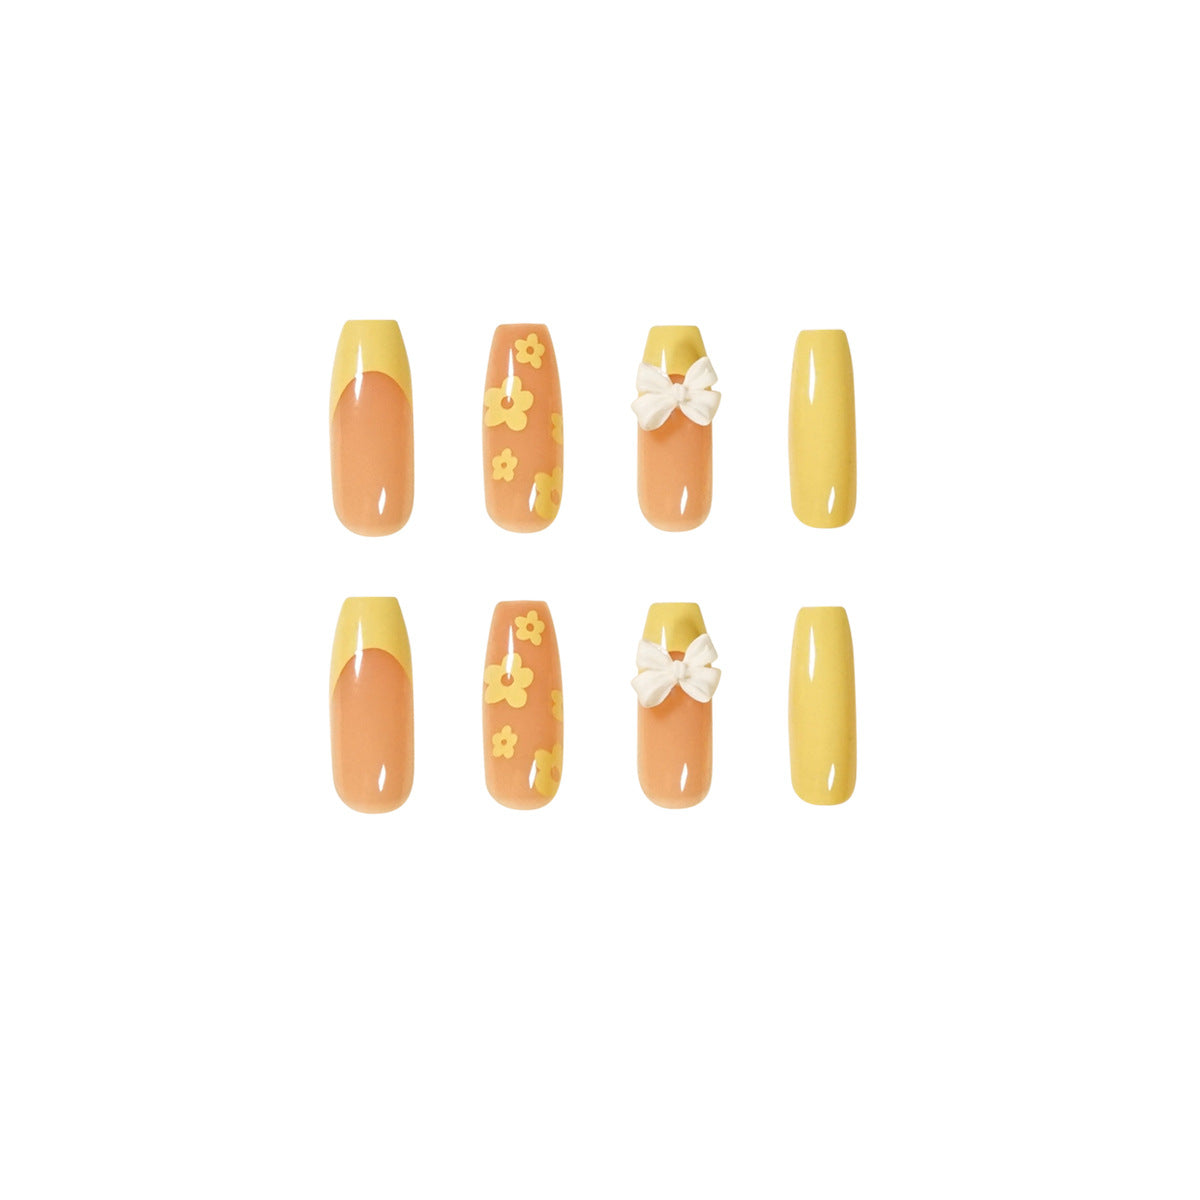 Sunshine Blooms Square Shape Press On Nails - Galspro